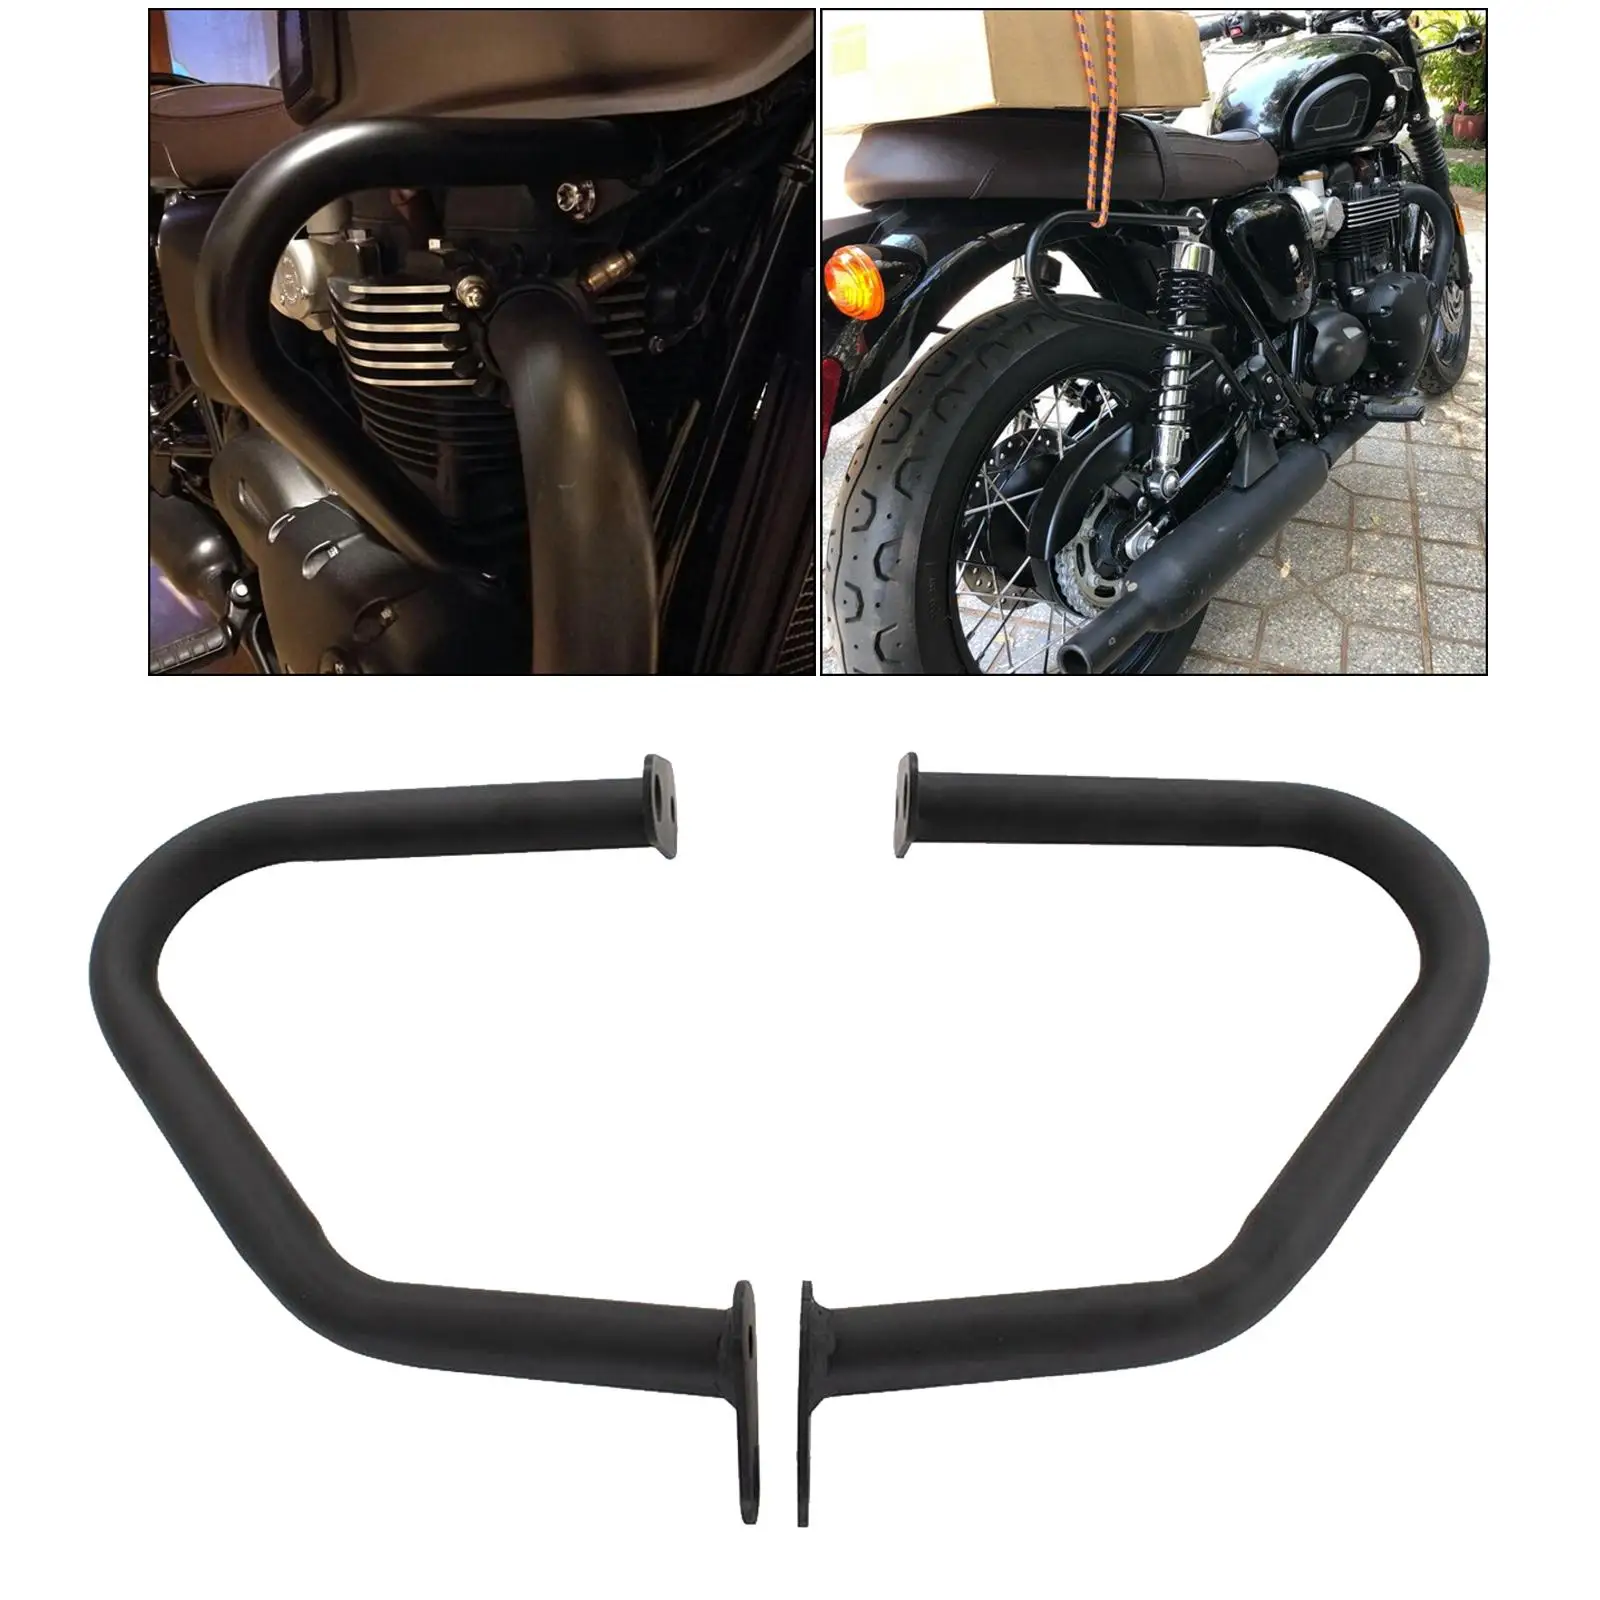 2x Black Motorcycle Engine Guard Protector Crash Bars Replacement for Thruxton 1200 2016-2019